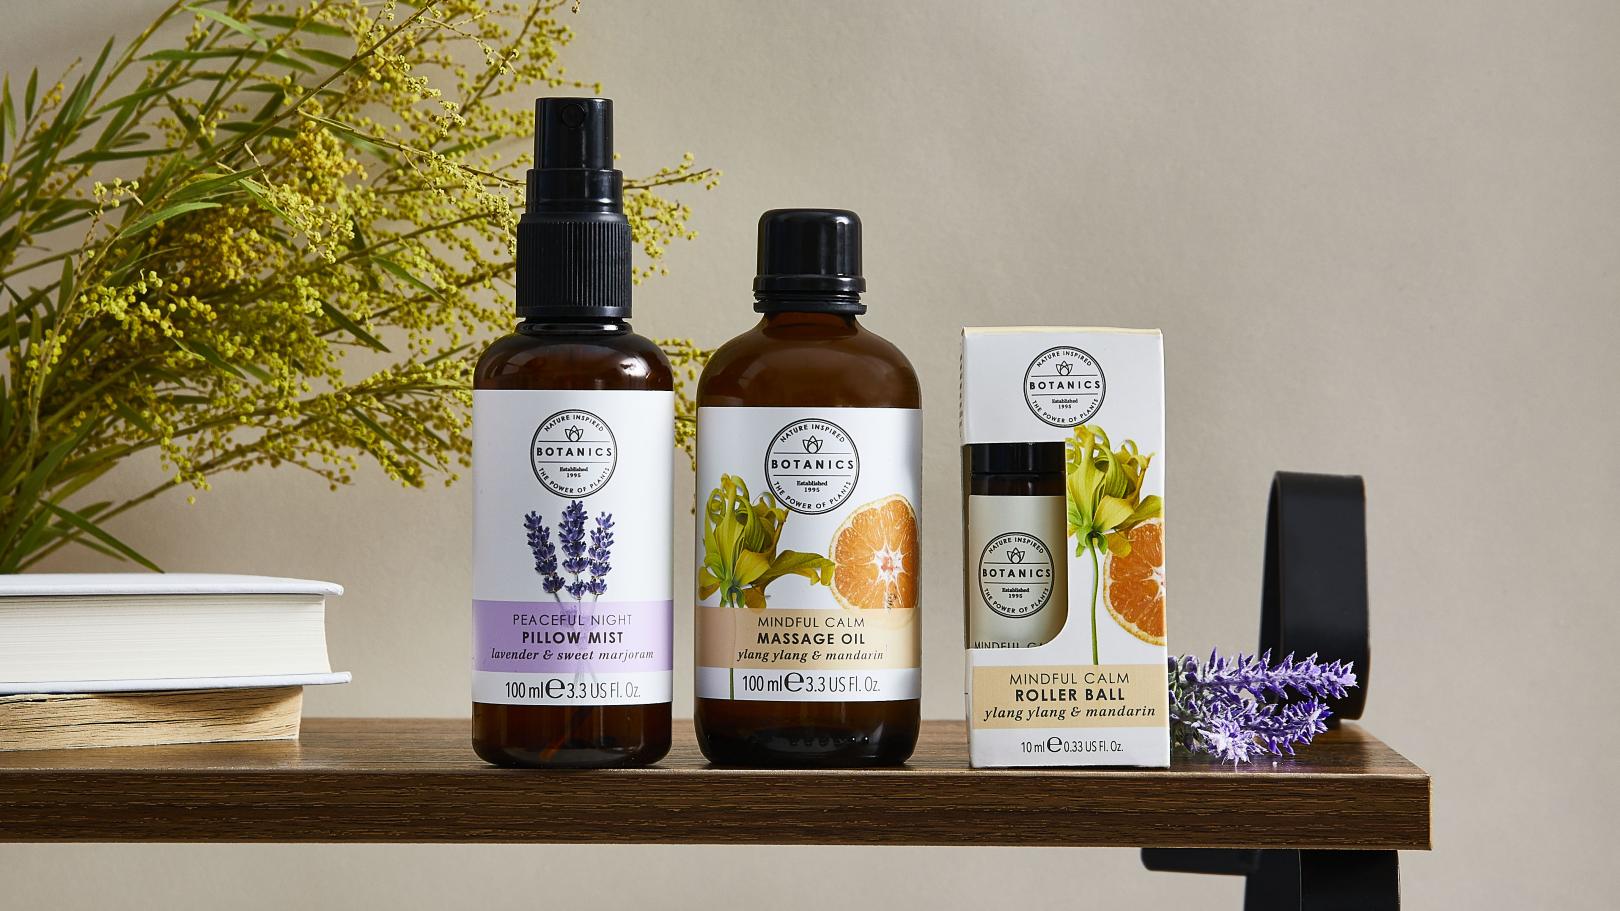 Group shot of products from Botanics